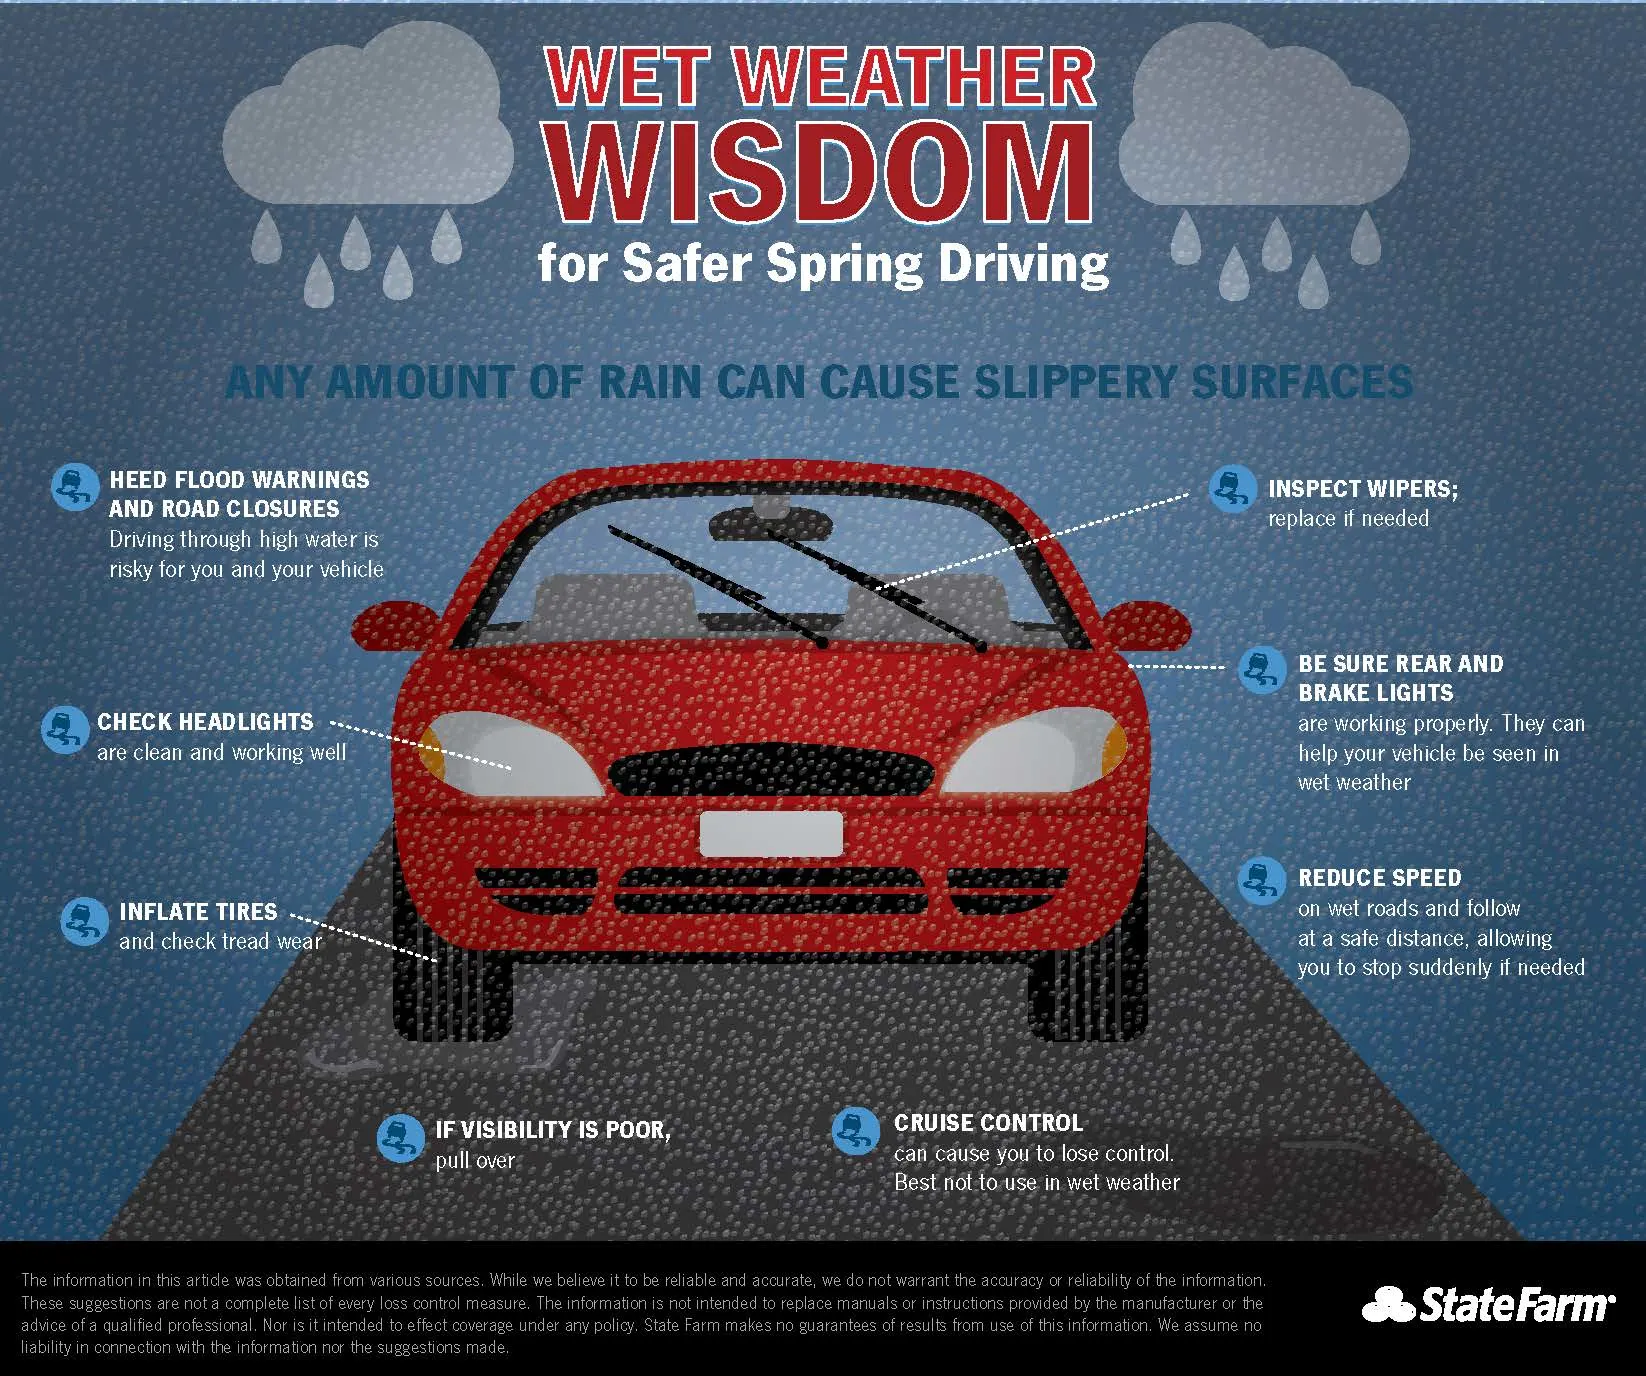 Safe Driving Infographic